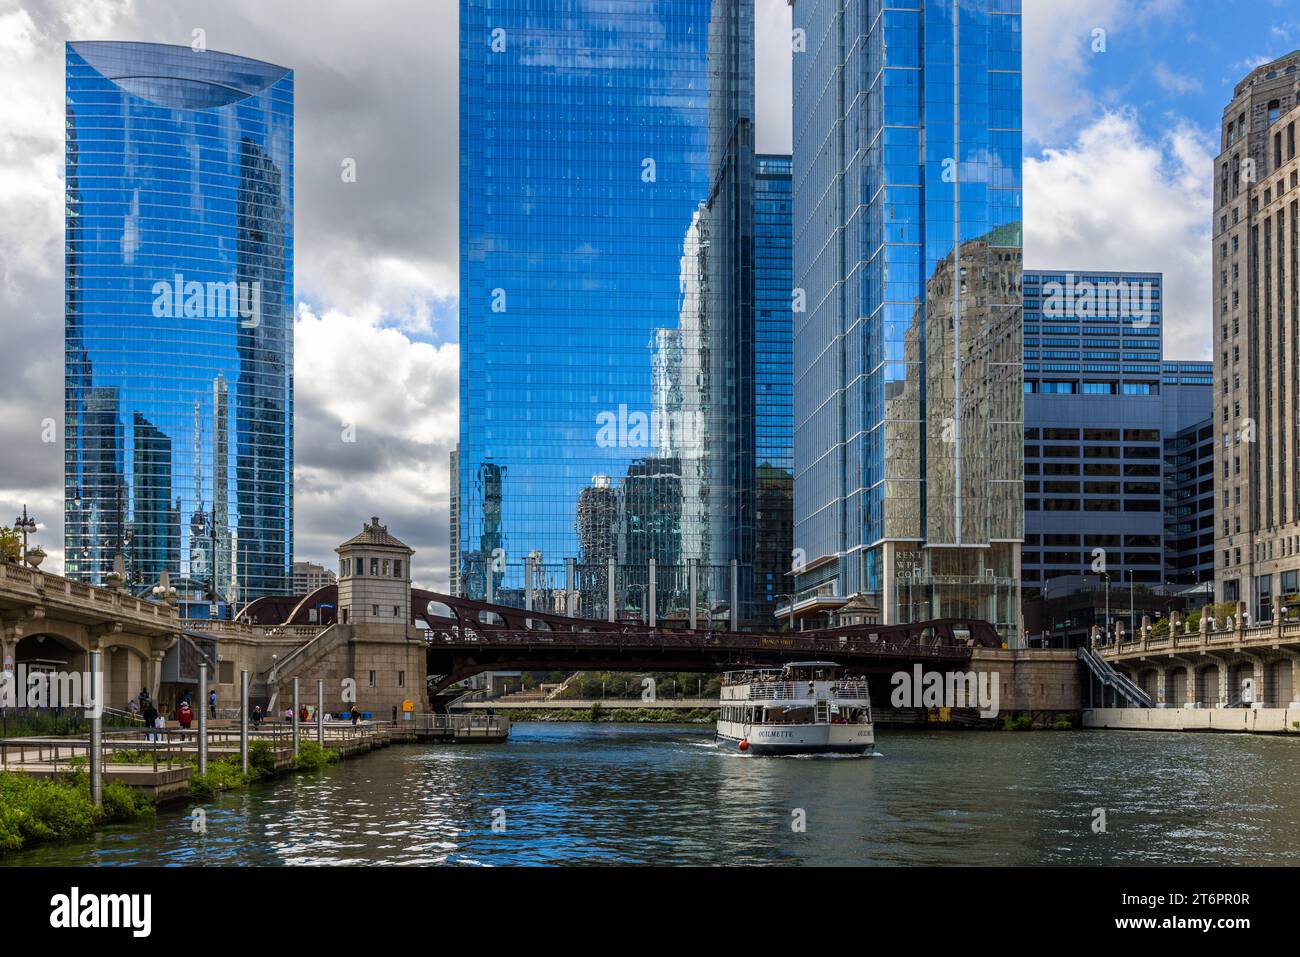 Architectural cruise on the Chicago River and reflection of skyscrapers. The bridges over the Chicago River are raised when necessary to allow larger ships to pass. The bridge keepers work in the historic bridge houses of Chicago, United States Stock Photo